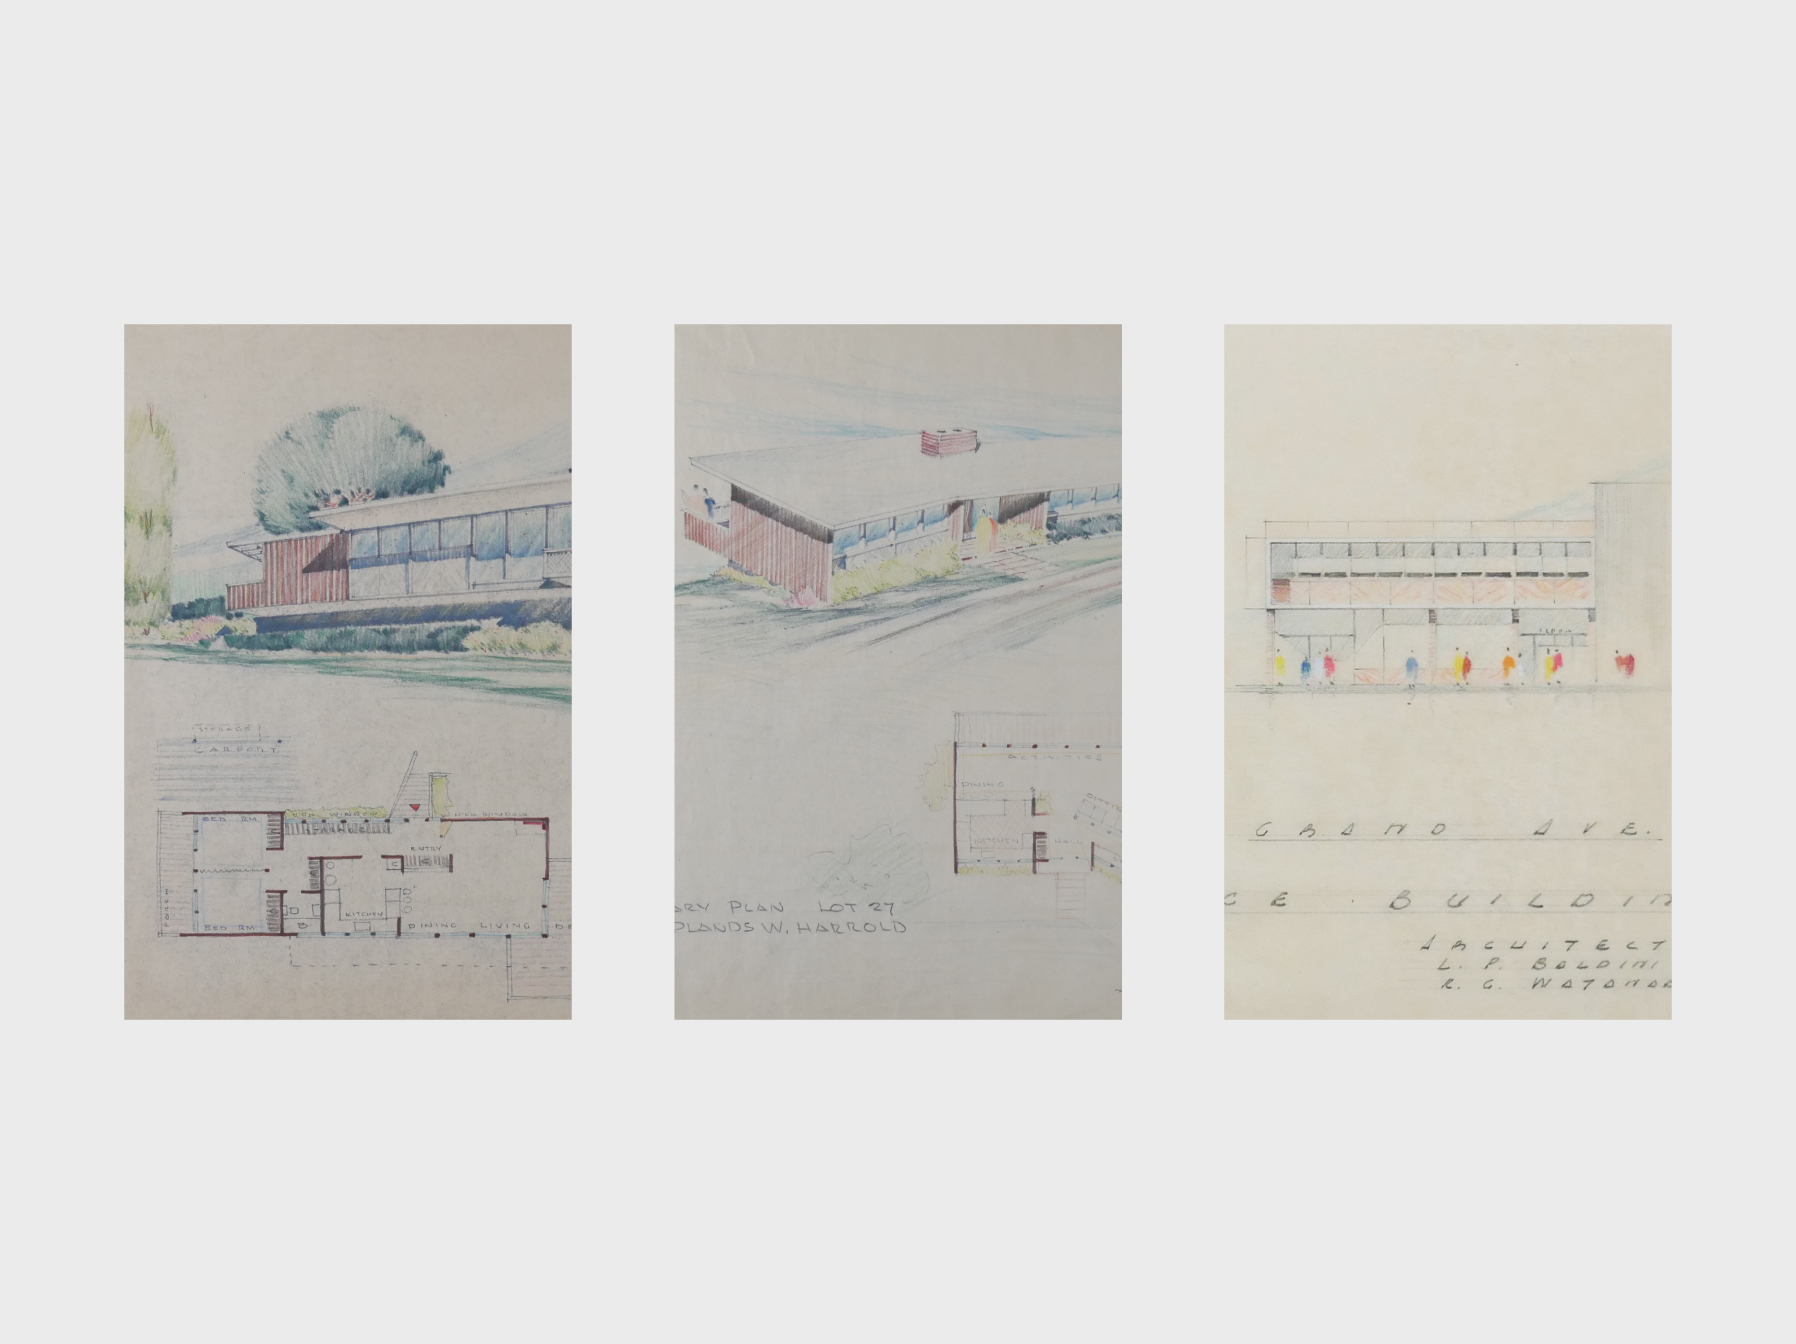 Preliminary drawings of a Midcentury Modern residence in California Circa 1951 by Roy Watanabe